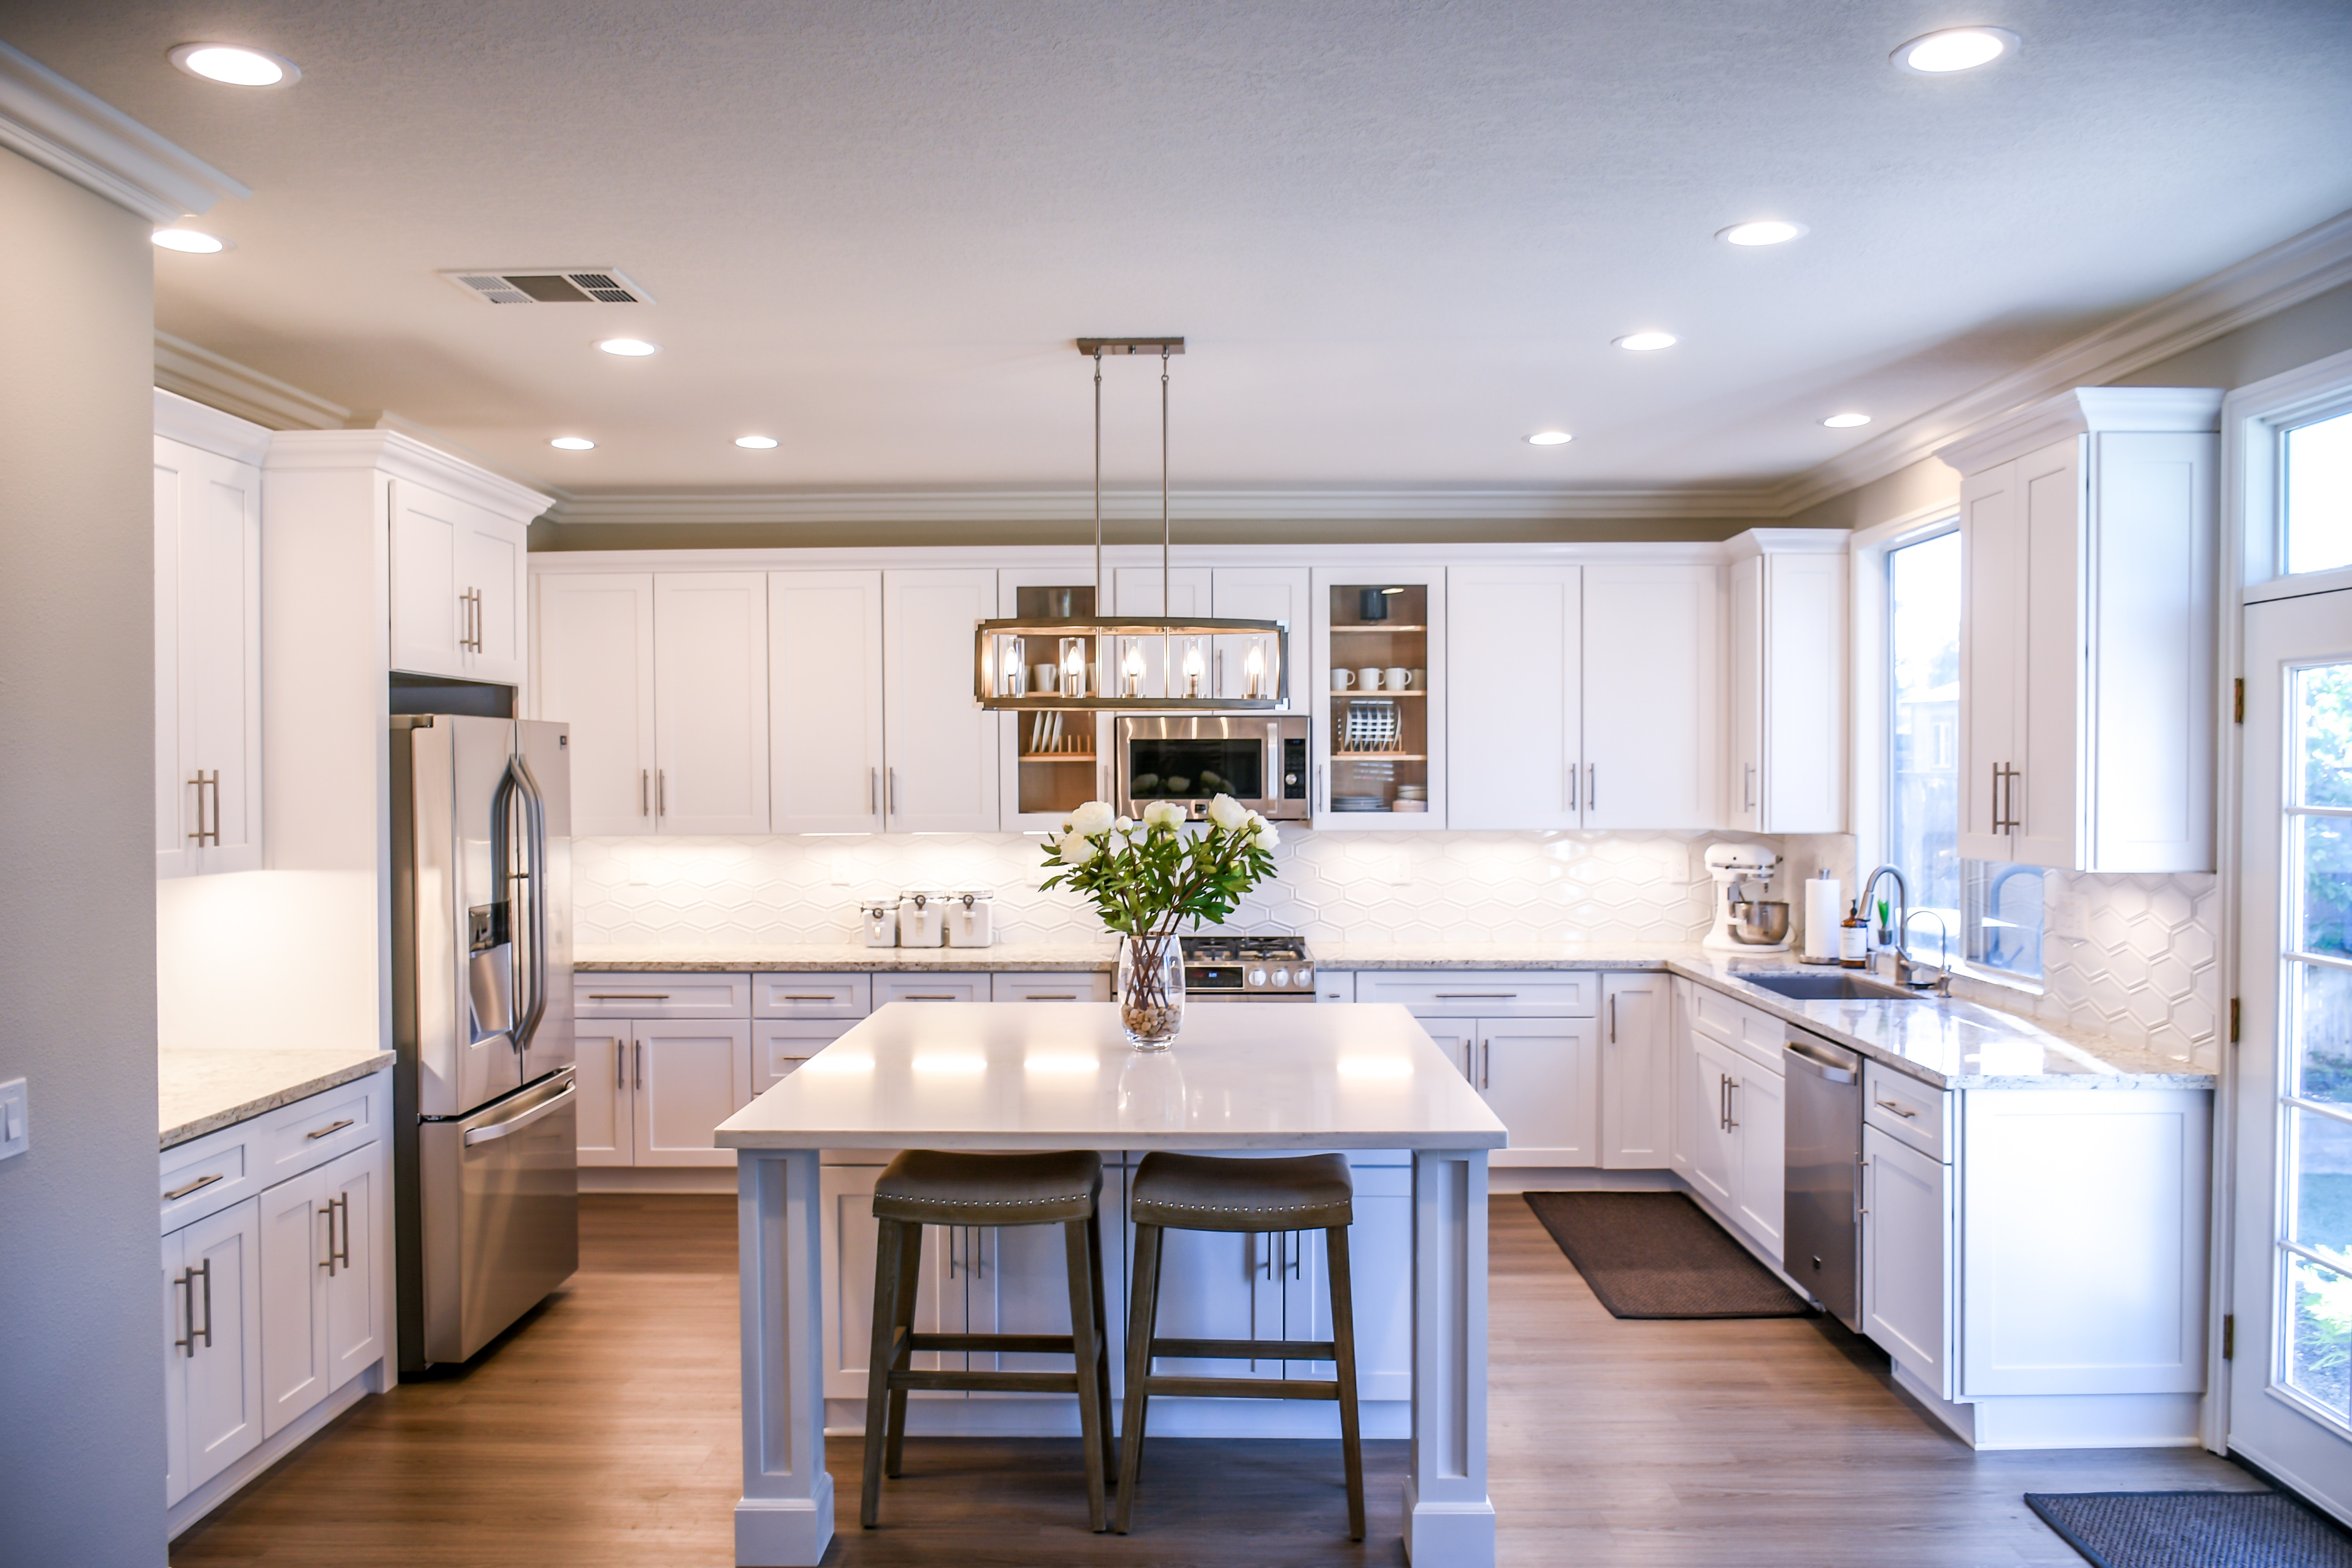 HOW MUCH DOES A KITCHEN RESPRAY COST?